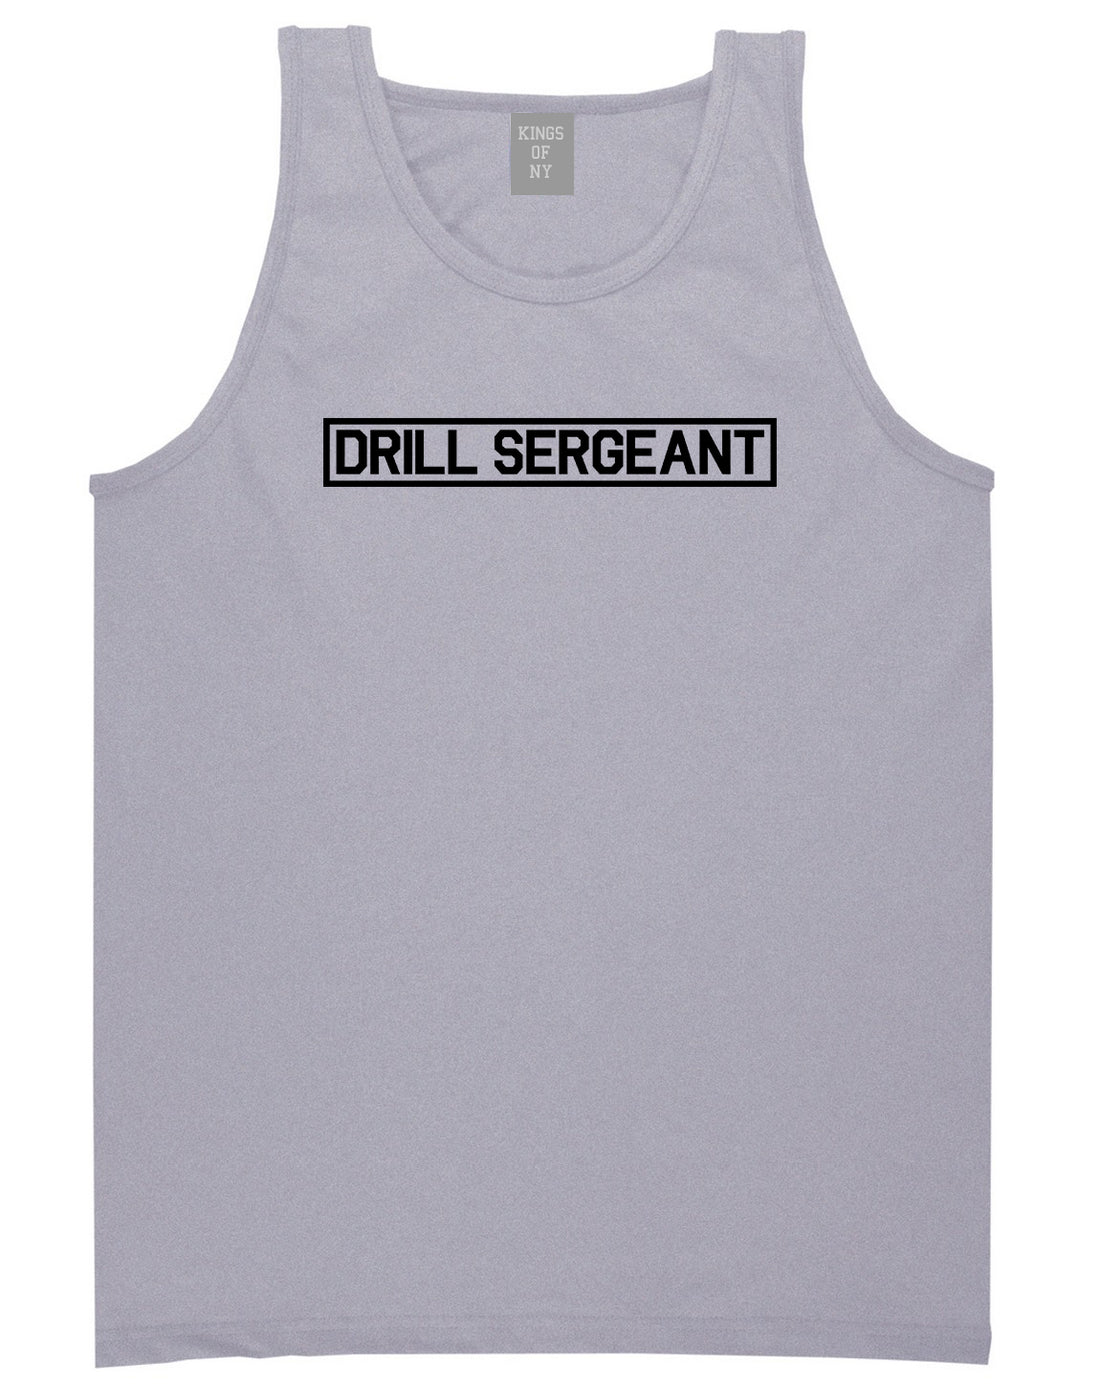 Drill_Sergeant_Sgt Mens Grey Tank Top Shirt by Kings Of NY